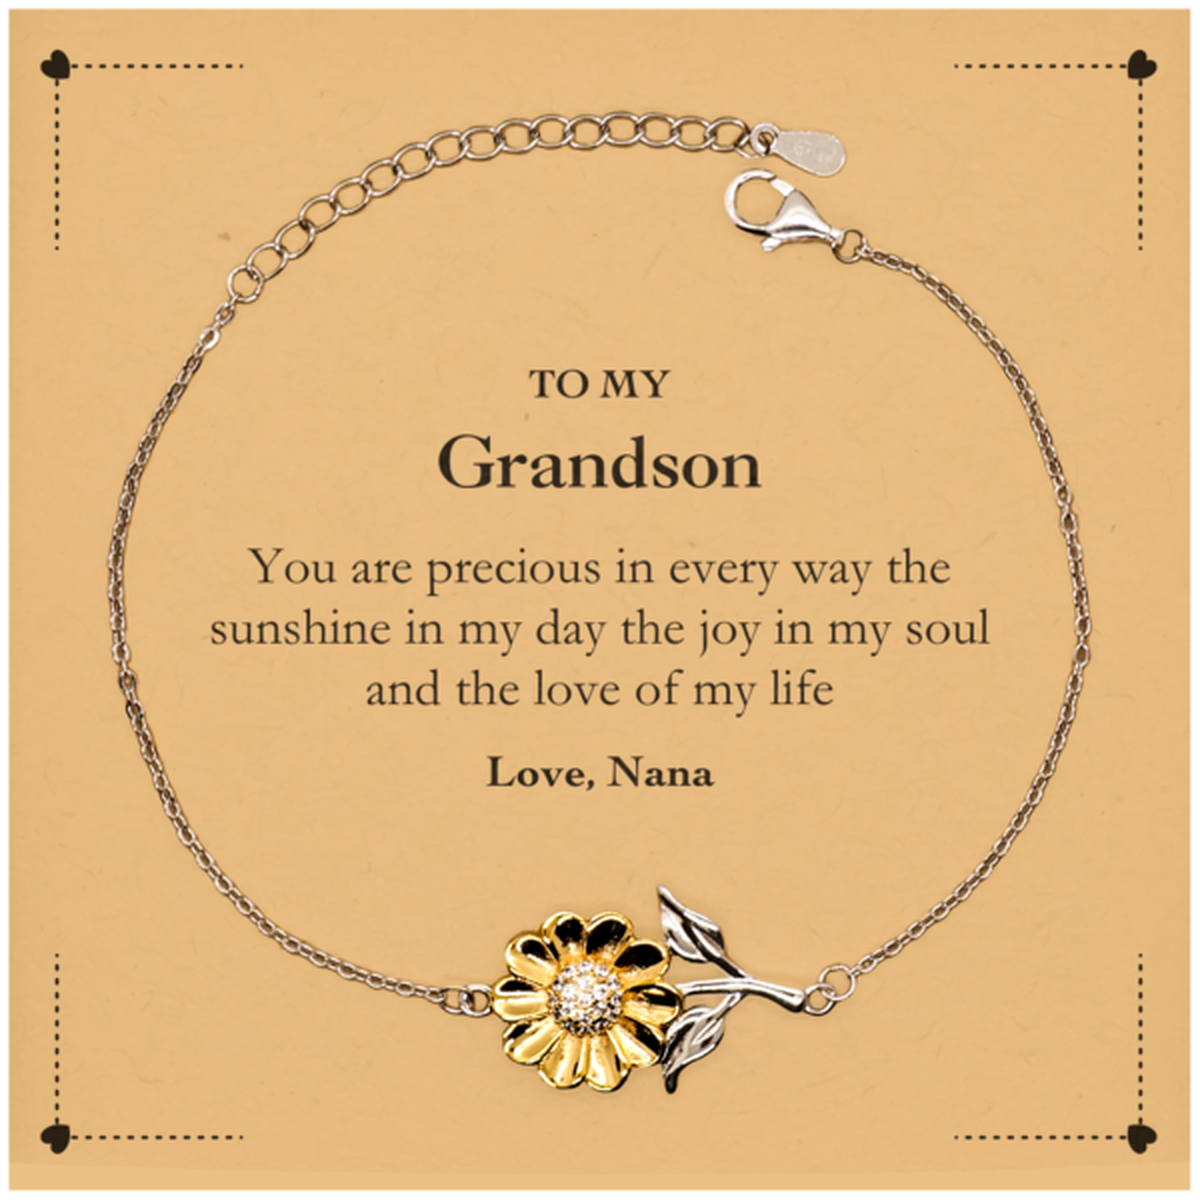 Graduation Gifts for Grandson Sunflower Bracelet Present from Nana, Christmas Grandson Birthday Gifts Grandson You are precious in every way the sunshine in my day. Love, Nana